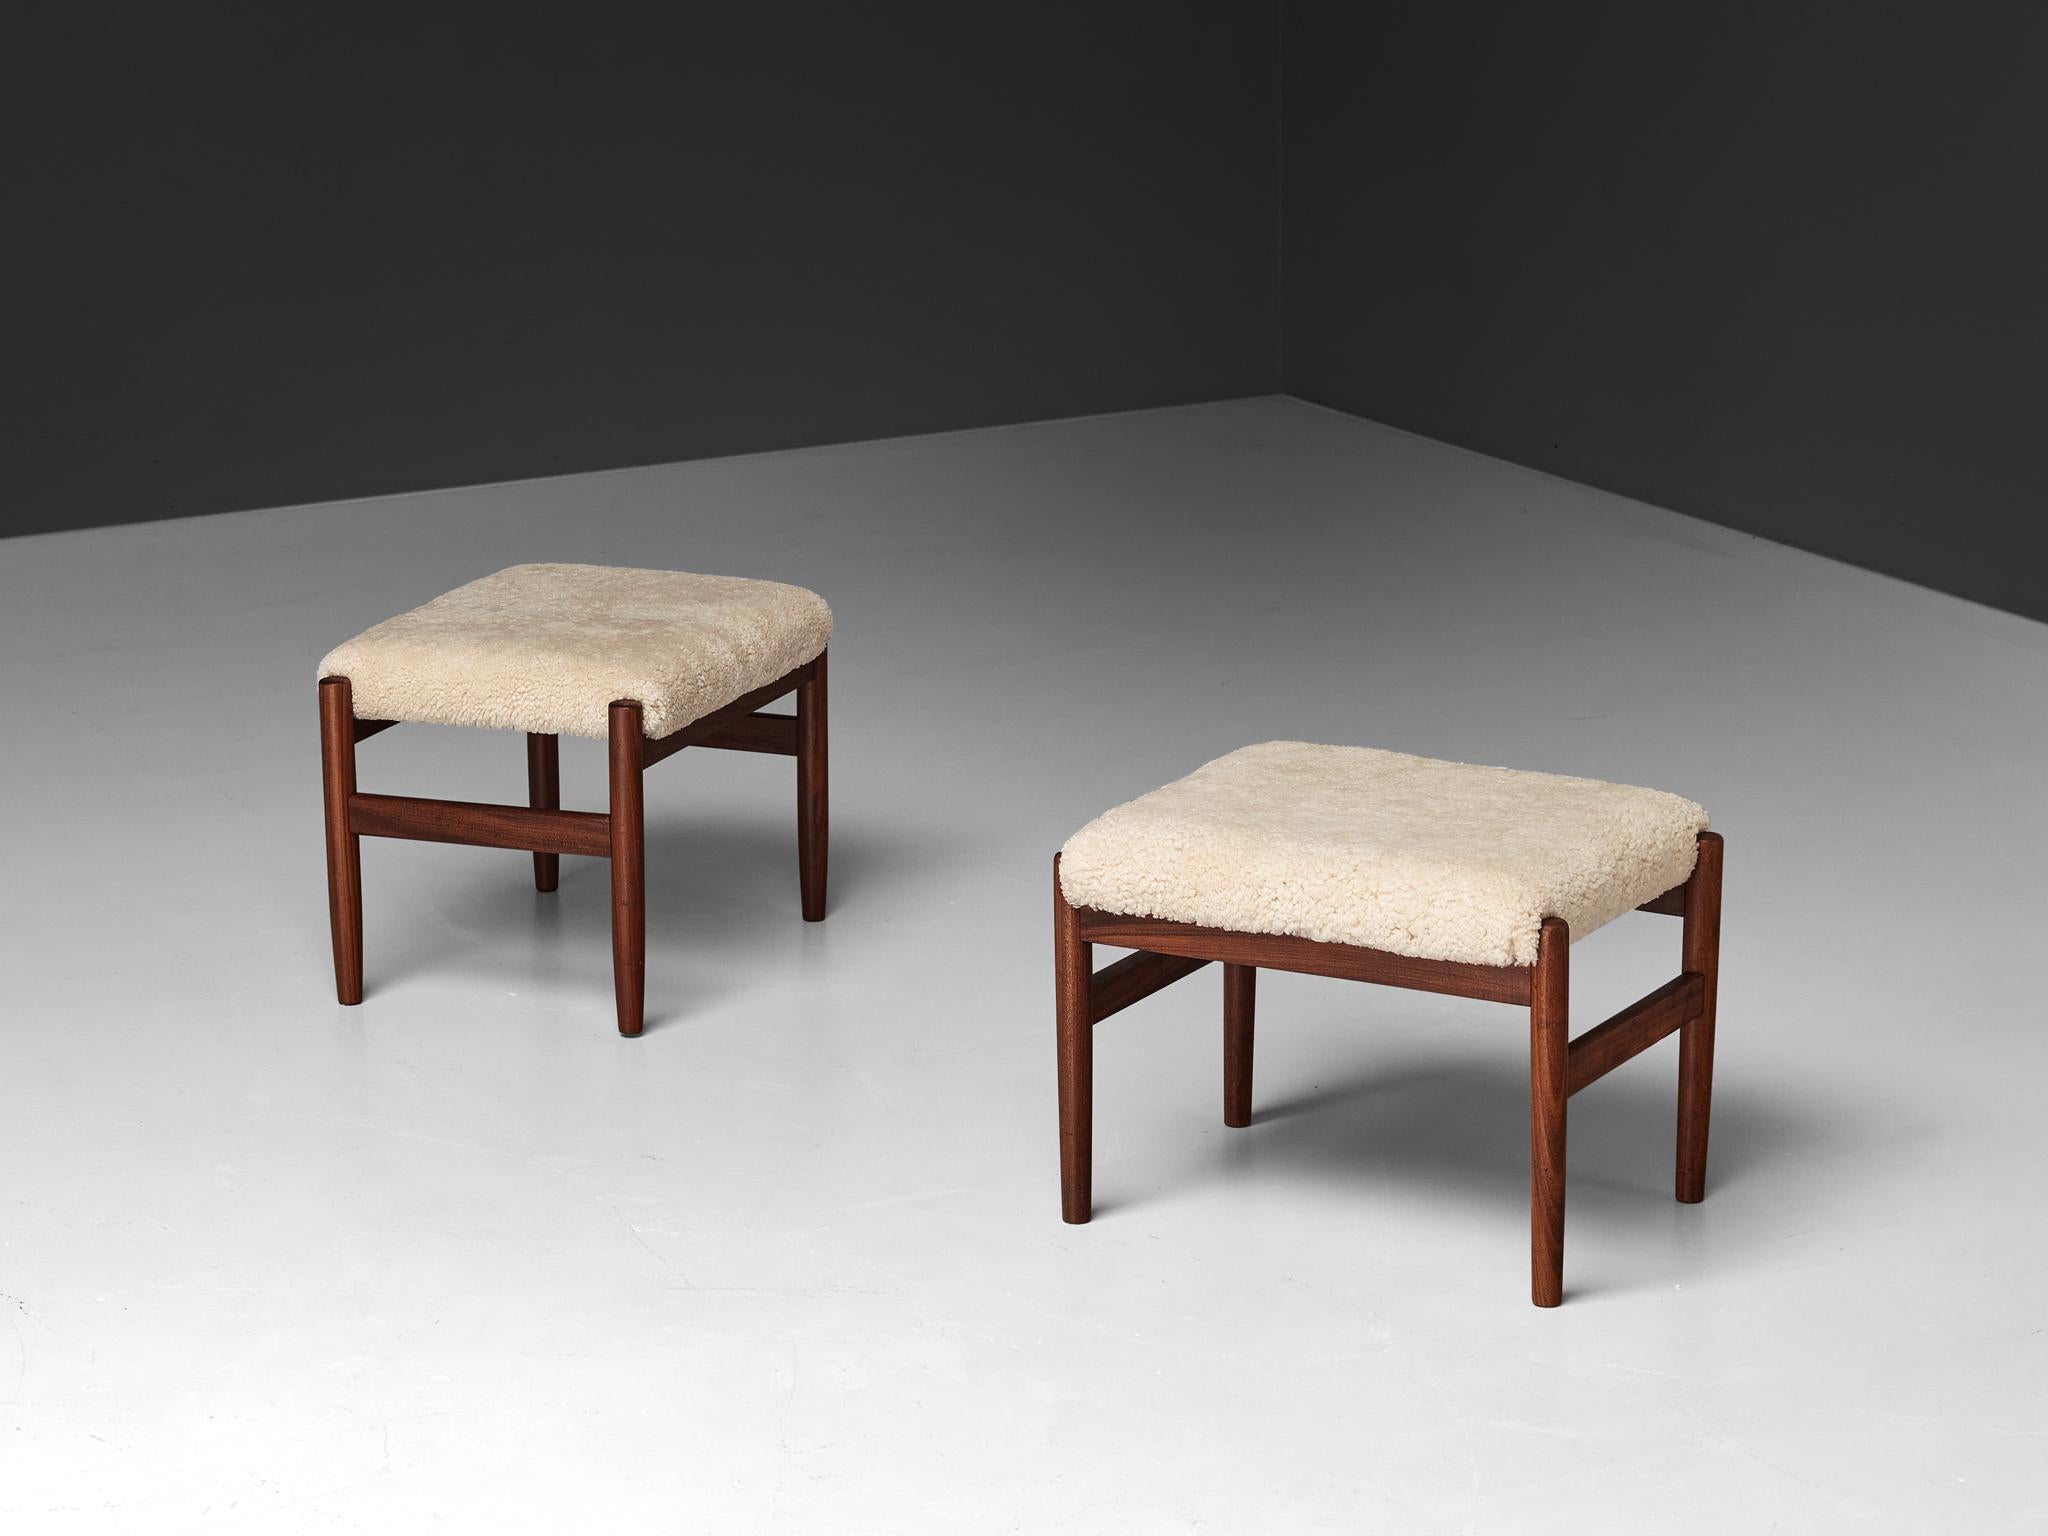 Mid-20th Century Scandinavian Stools in Teak and Shearling Upholstery  For Sale